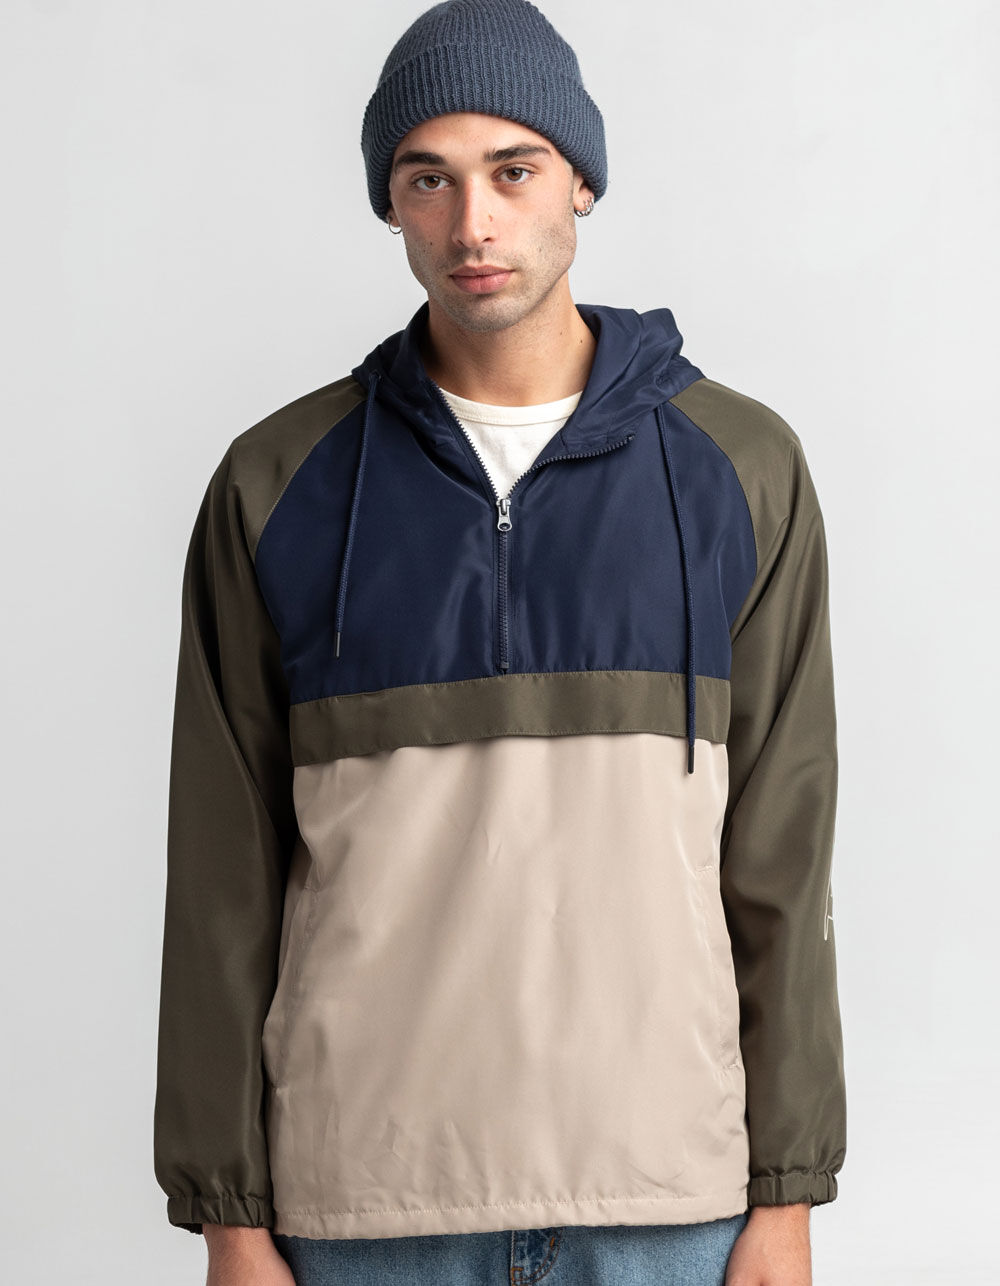 RSQ Colorblock Mens Anorak Jacket - NAVY COMBO | Tillys